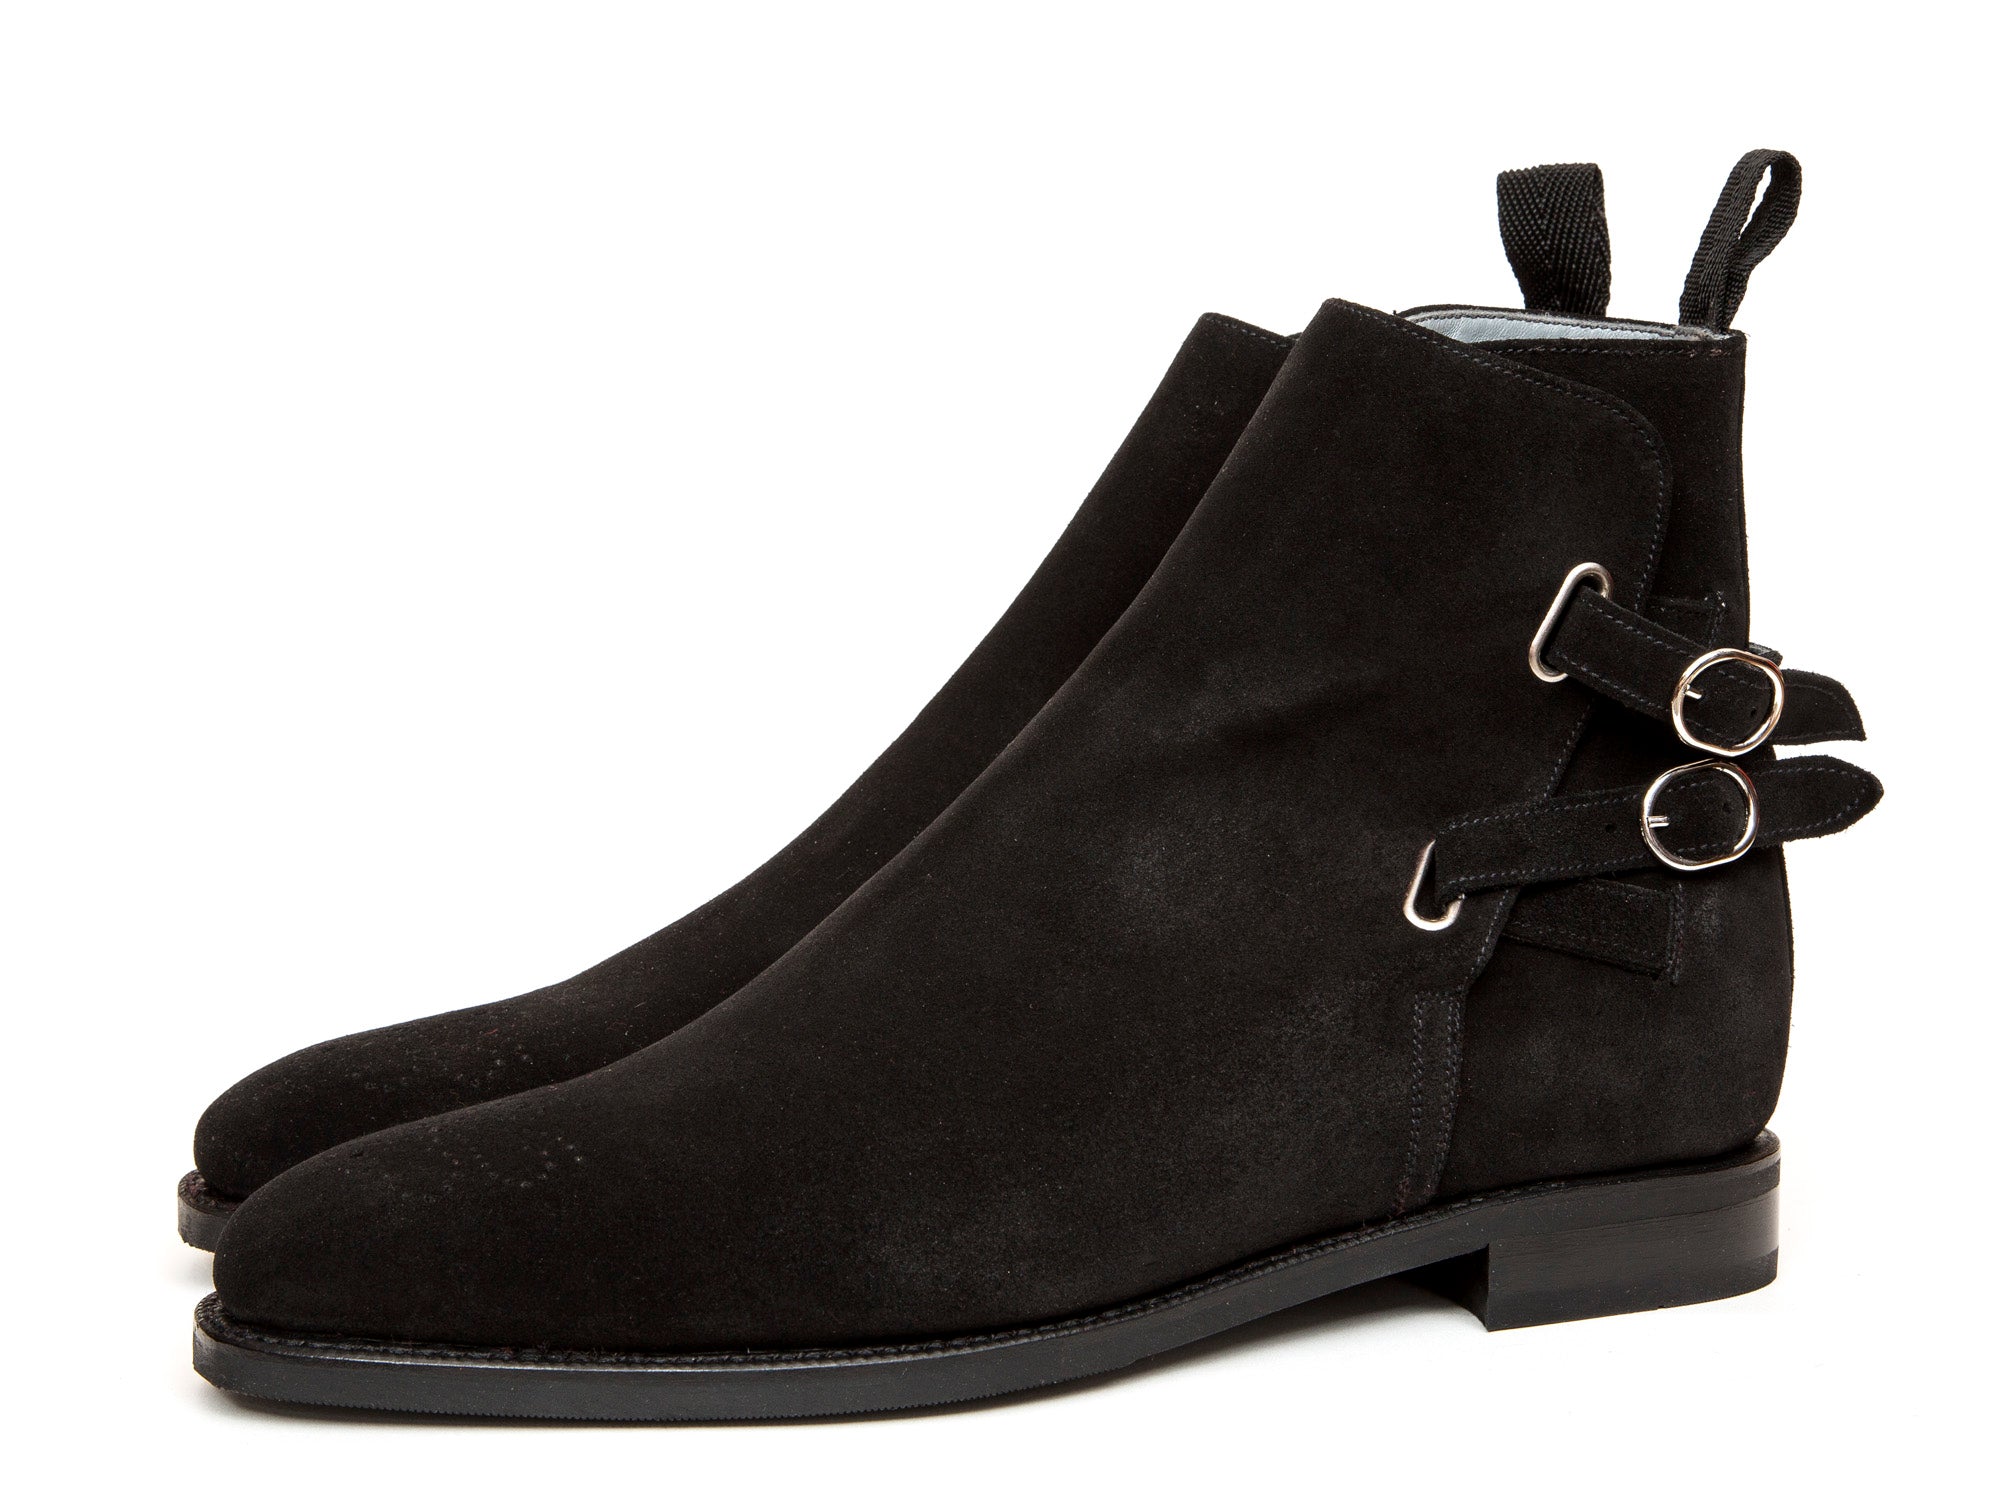 Genesee - MTO - Black Suede - MGF Last - Single Leather Sole